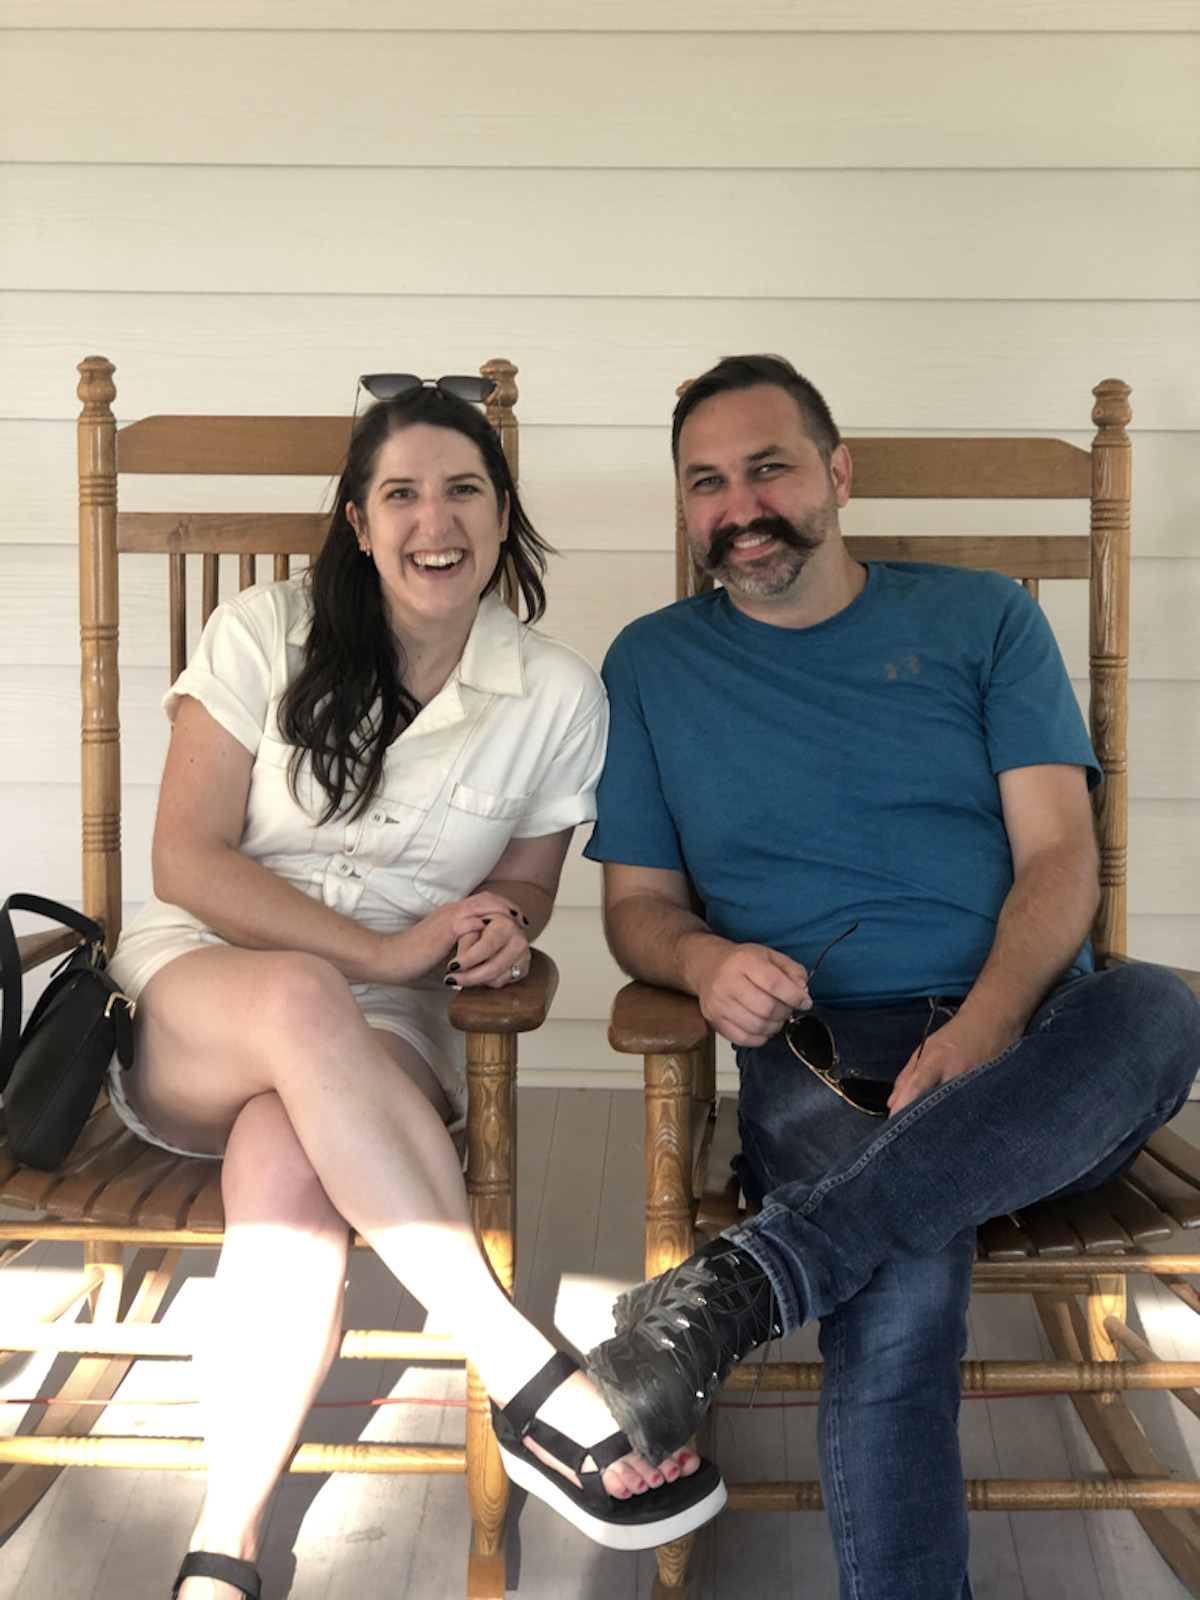 Two people sitting in rocking chairs smiling at the camera